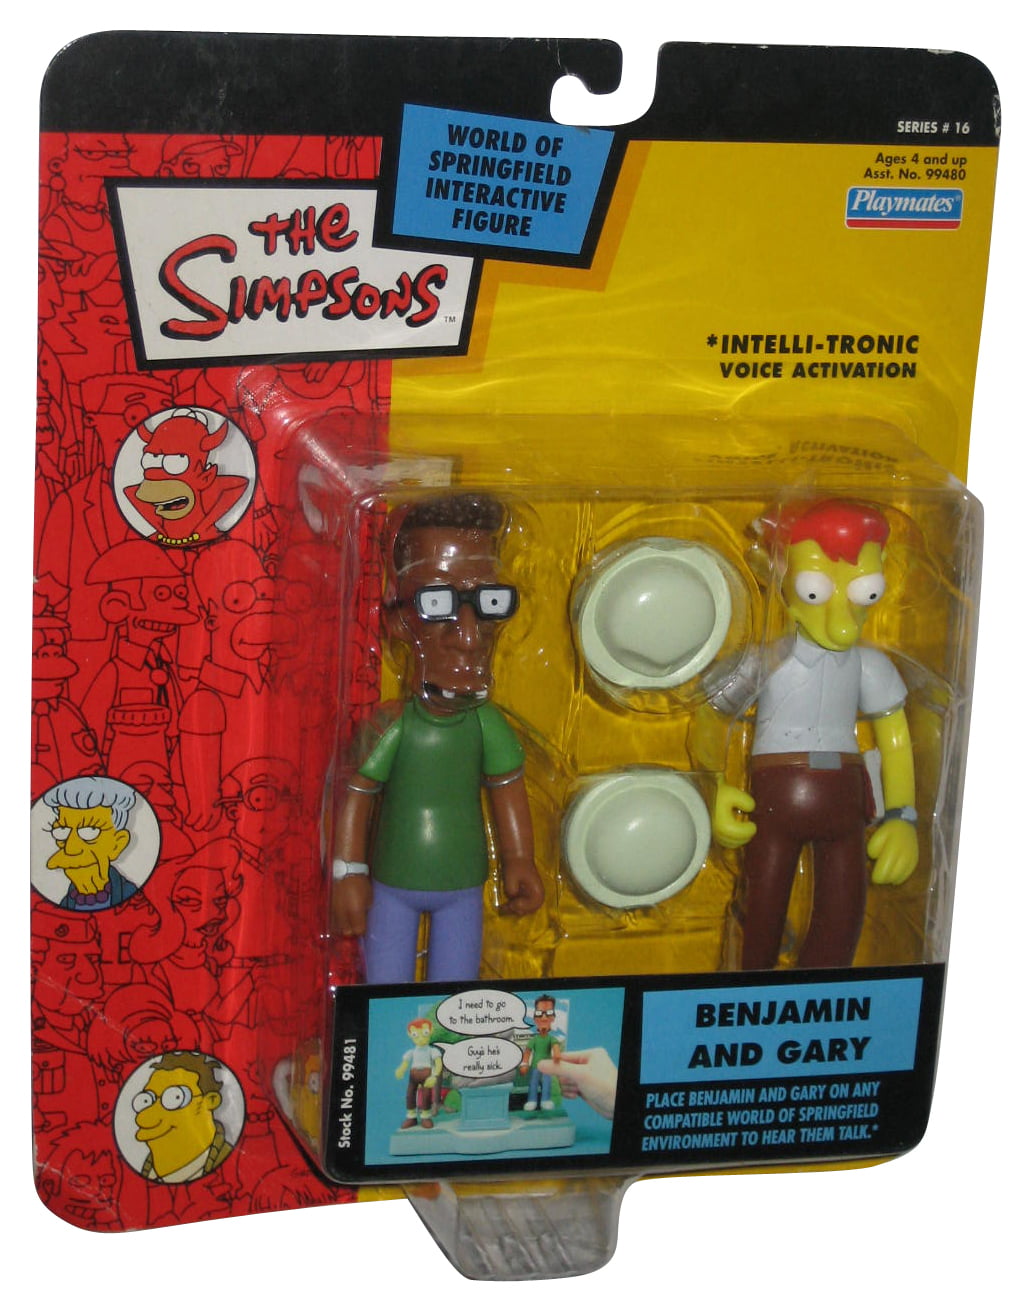 Playmates Toys The Simpsons Benjamin Gary Action Figure for sale online 